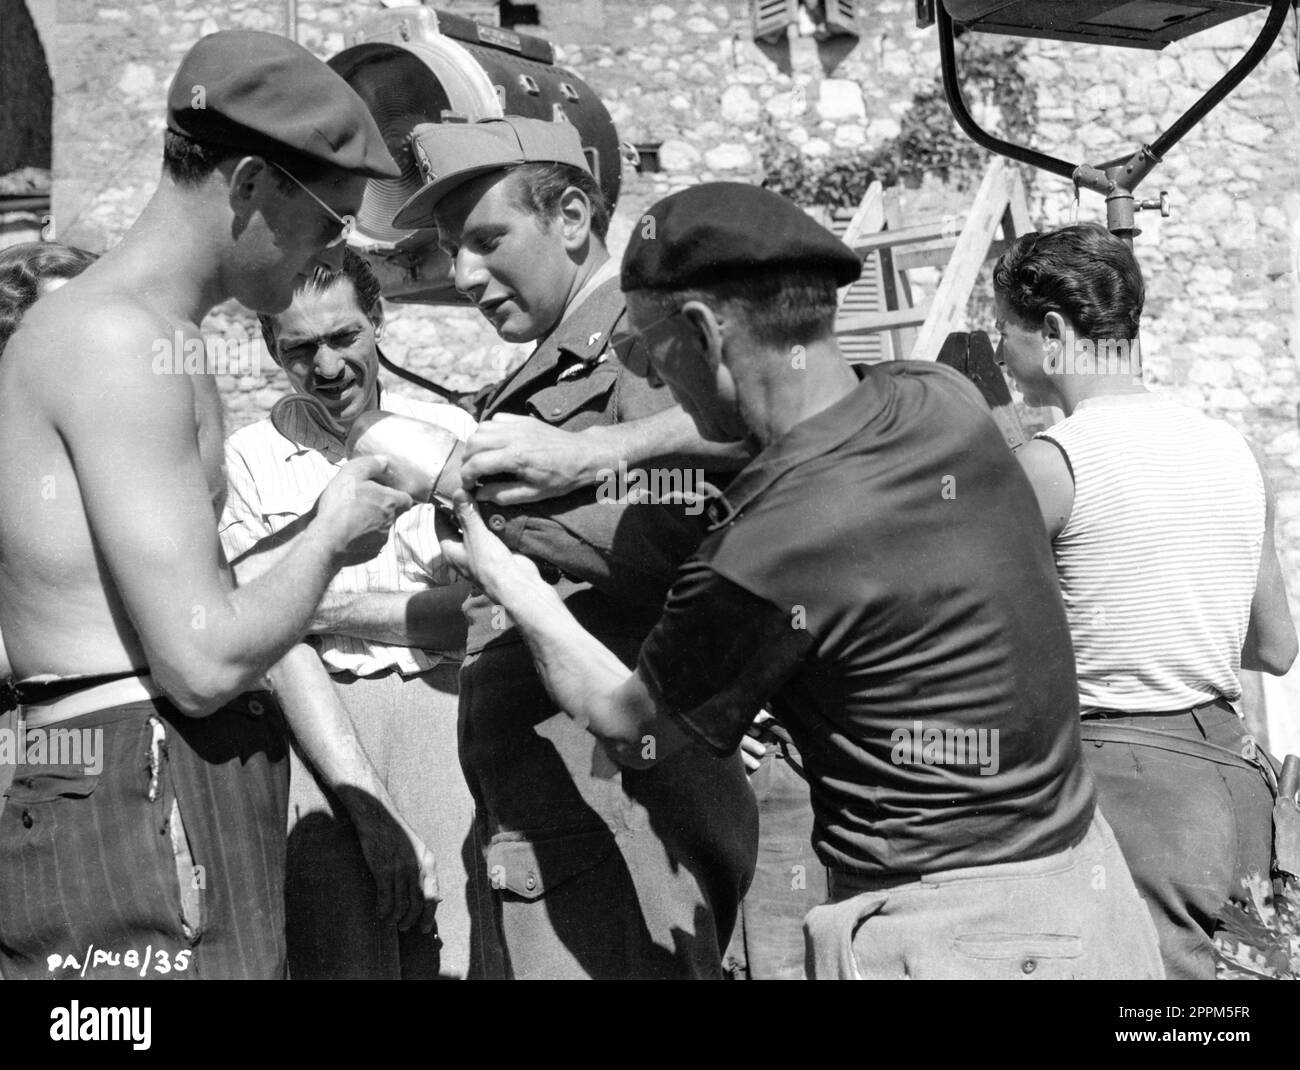 PETER USTINOV in costume as Private Angelo has his artificial arm and hook fixed by Crew Members on set location candid in Central Italy during filming of PRIVATE ANGELO 1949 directors / producers / screenplay MICHAEL ANDERSON and PETER USTINOV novel Eric Linklater costume design Nadia Benois Pilgrim Pictures / Associated British-Pathe Stock Photo